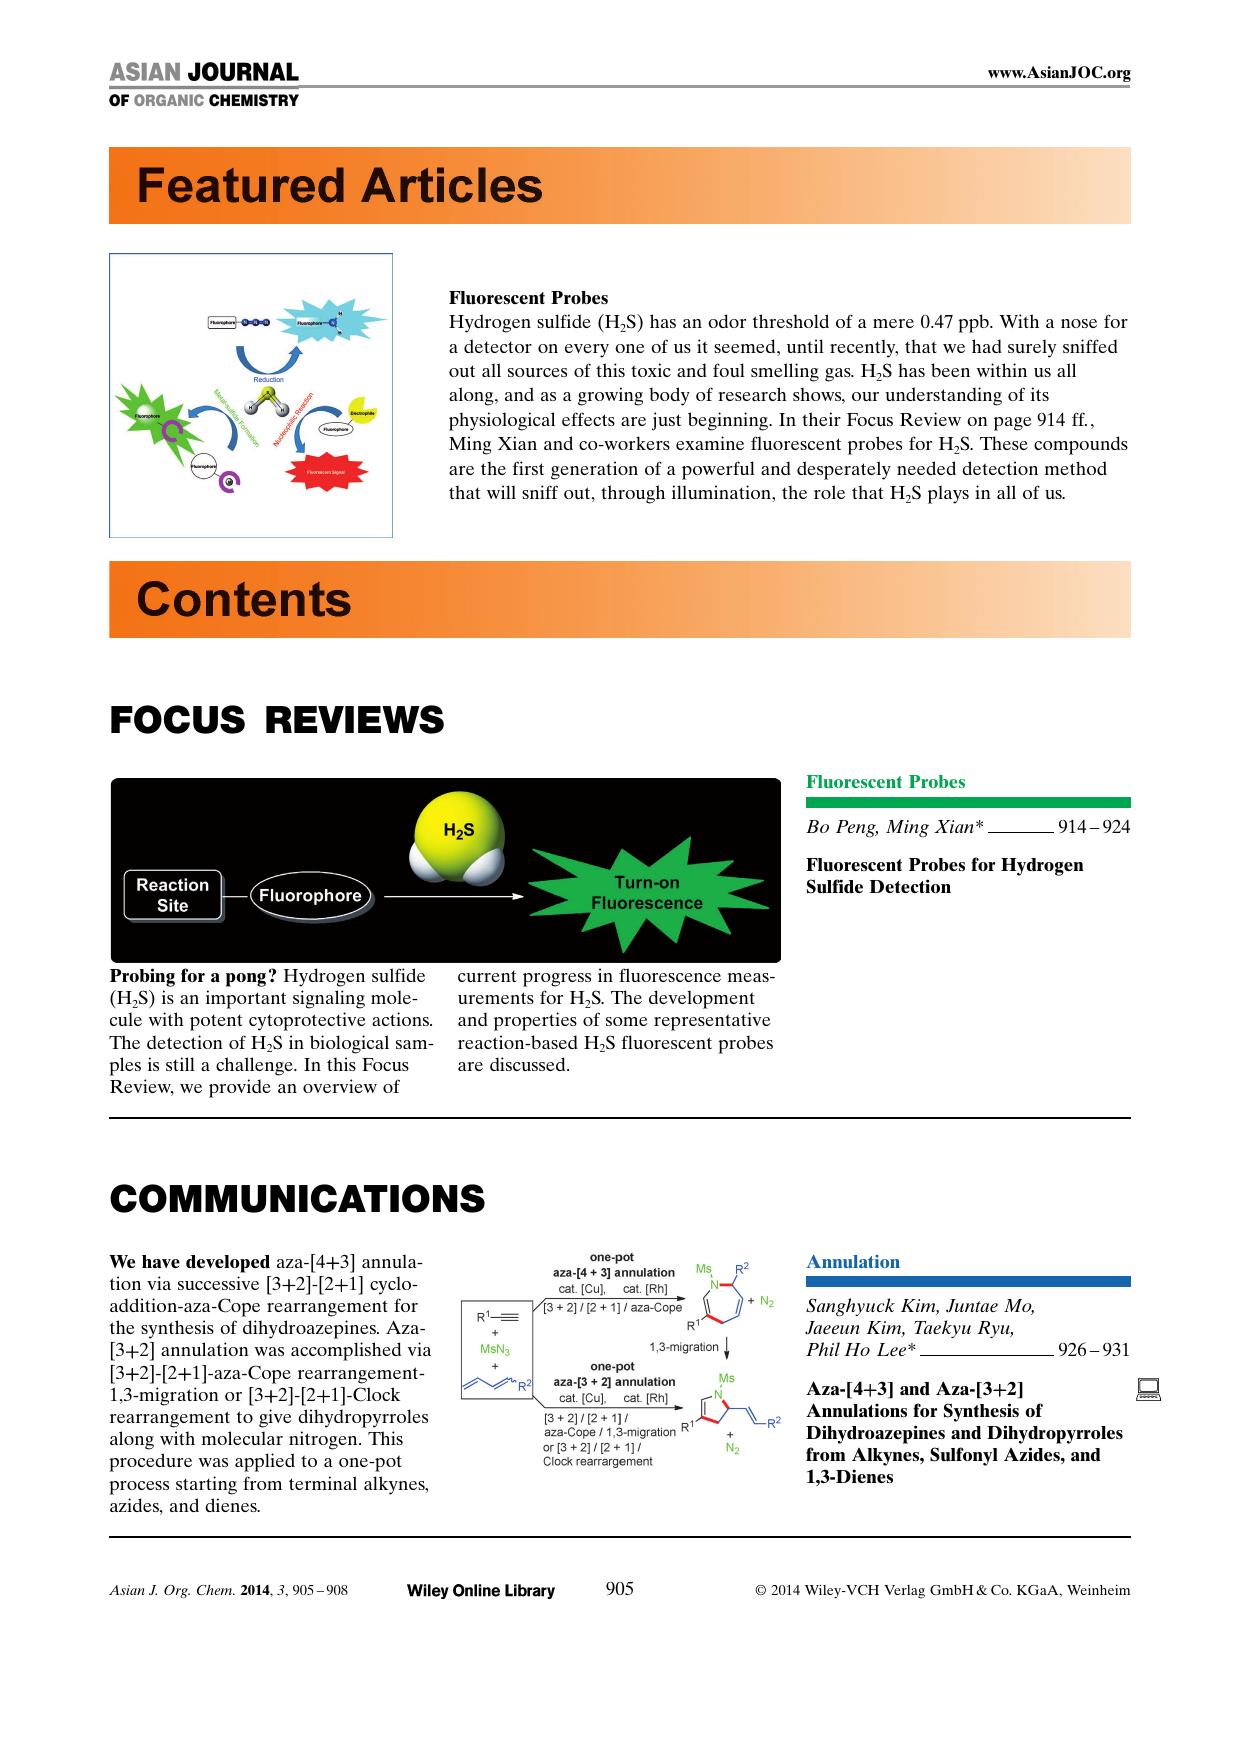 Graphical Abstract: Asian J. Org. Chem. 92014 by Unknown